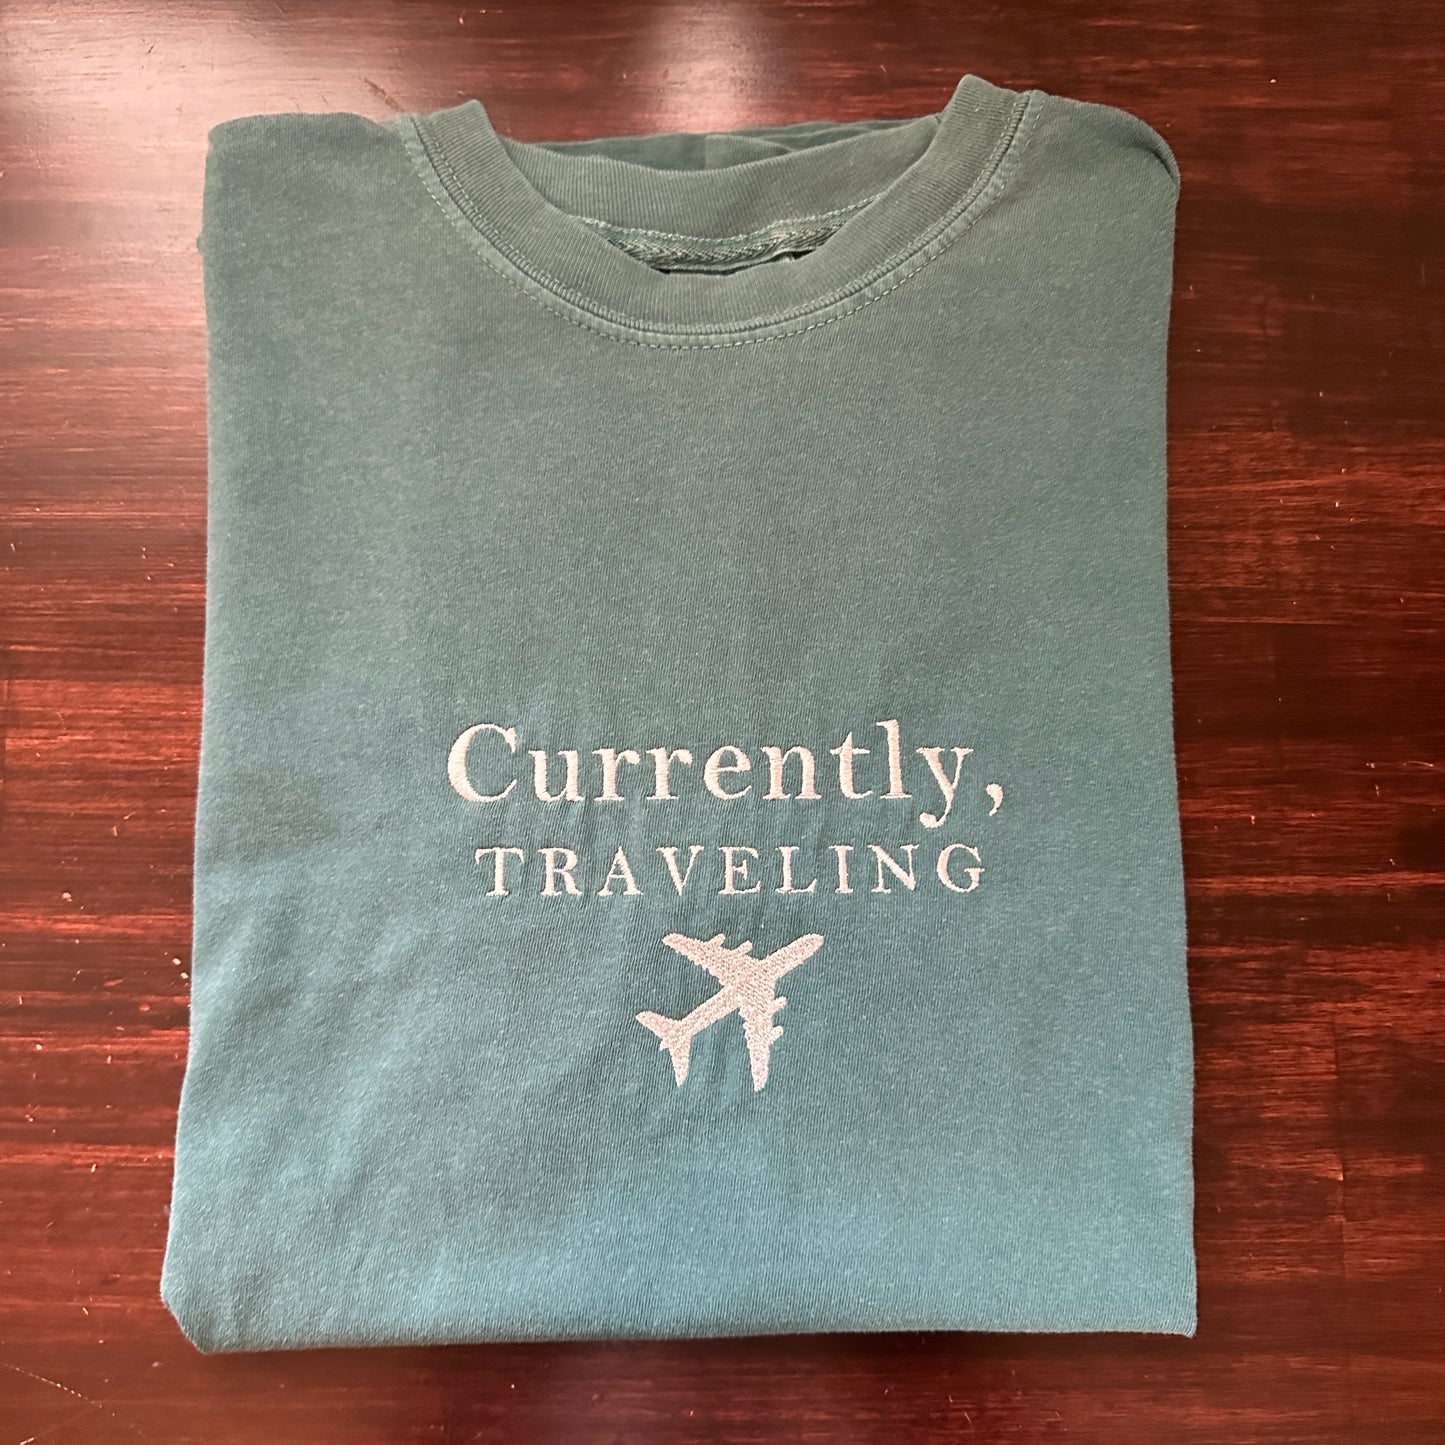 Currently, Traveling T-Shirt